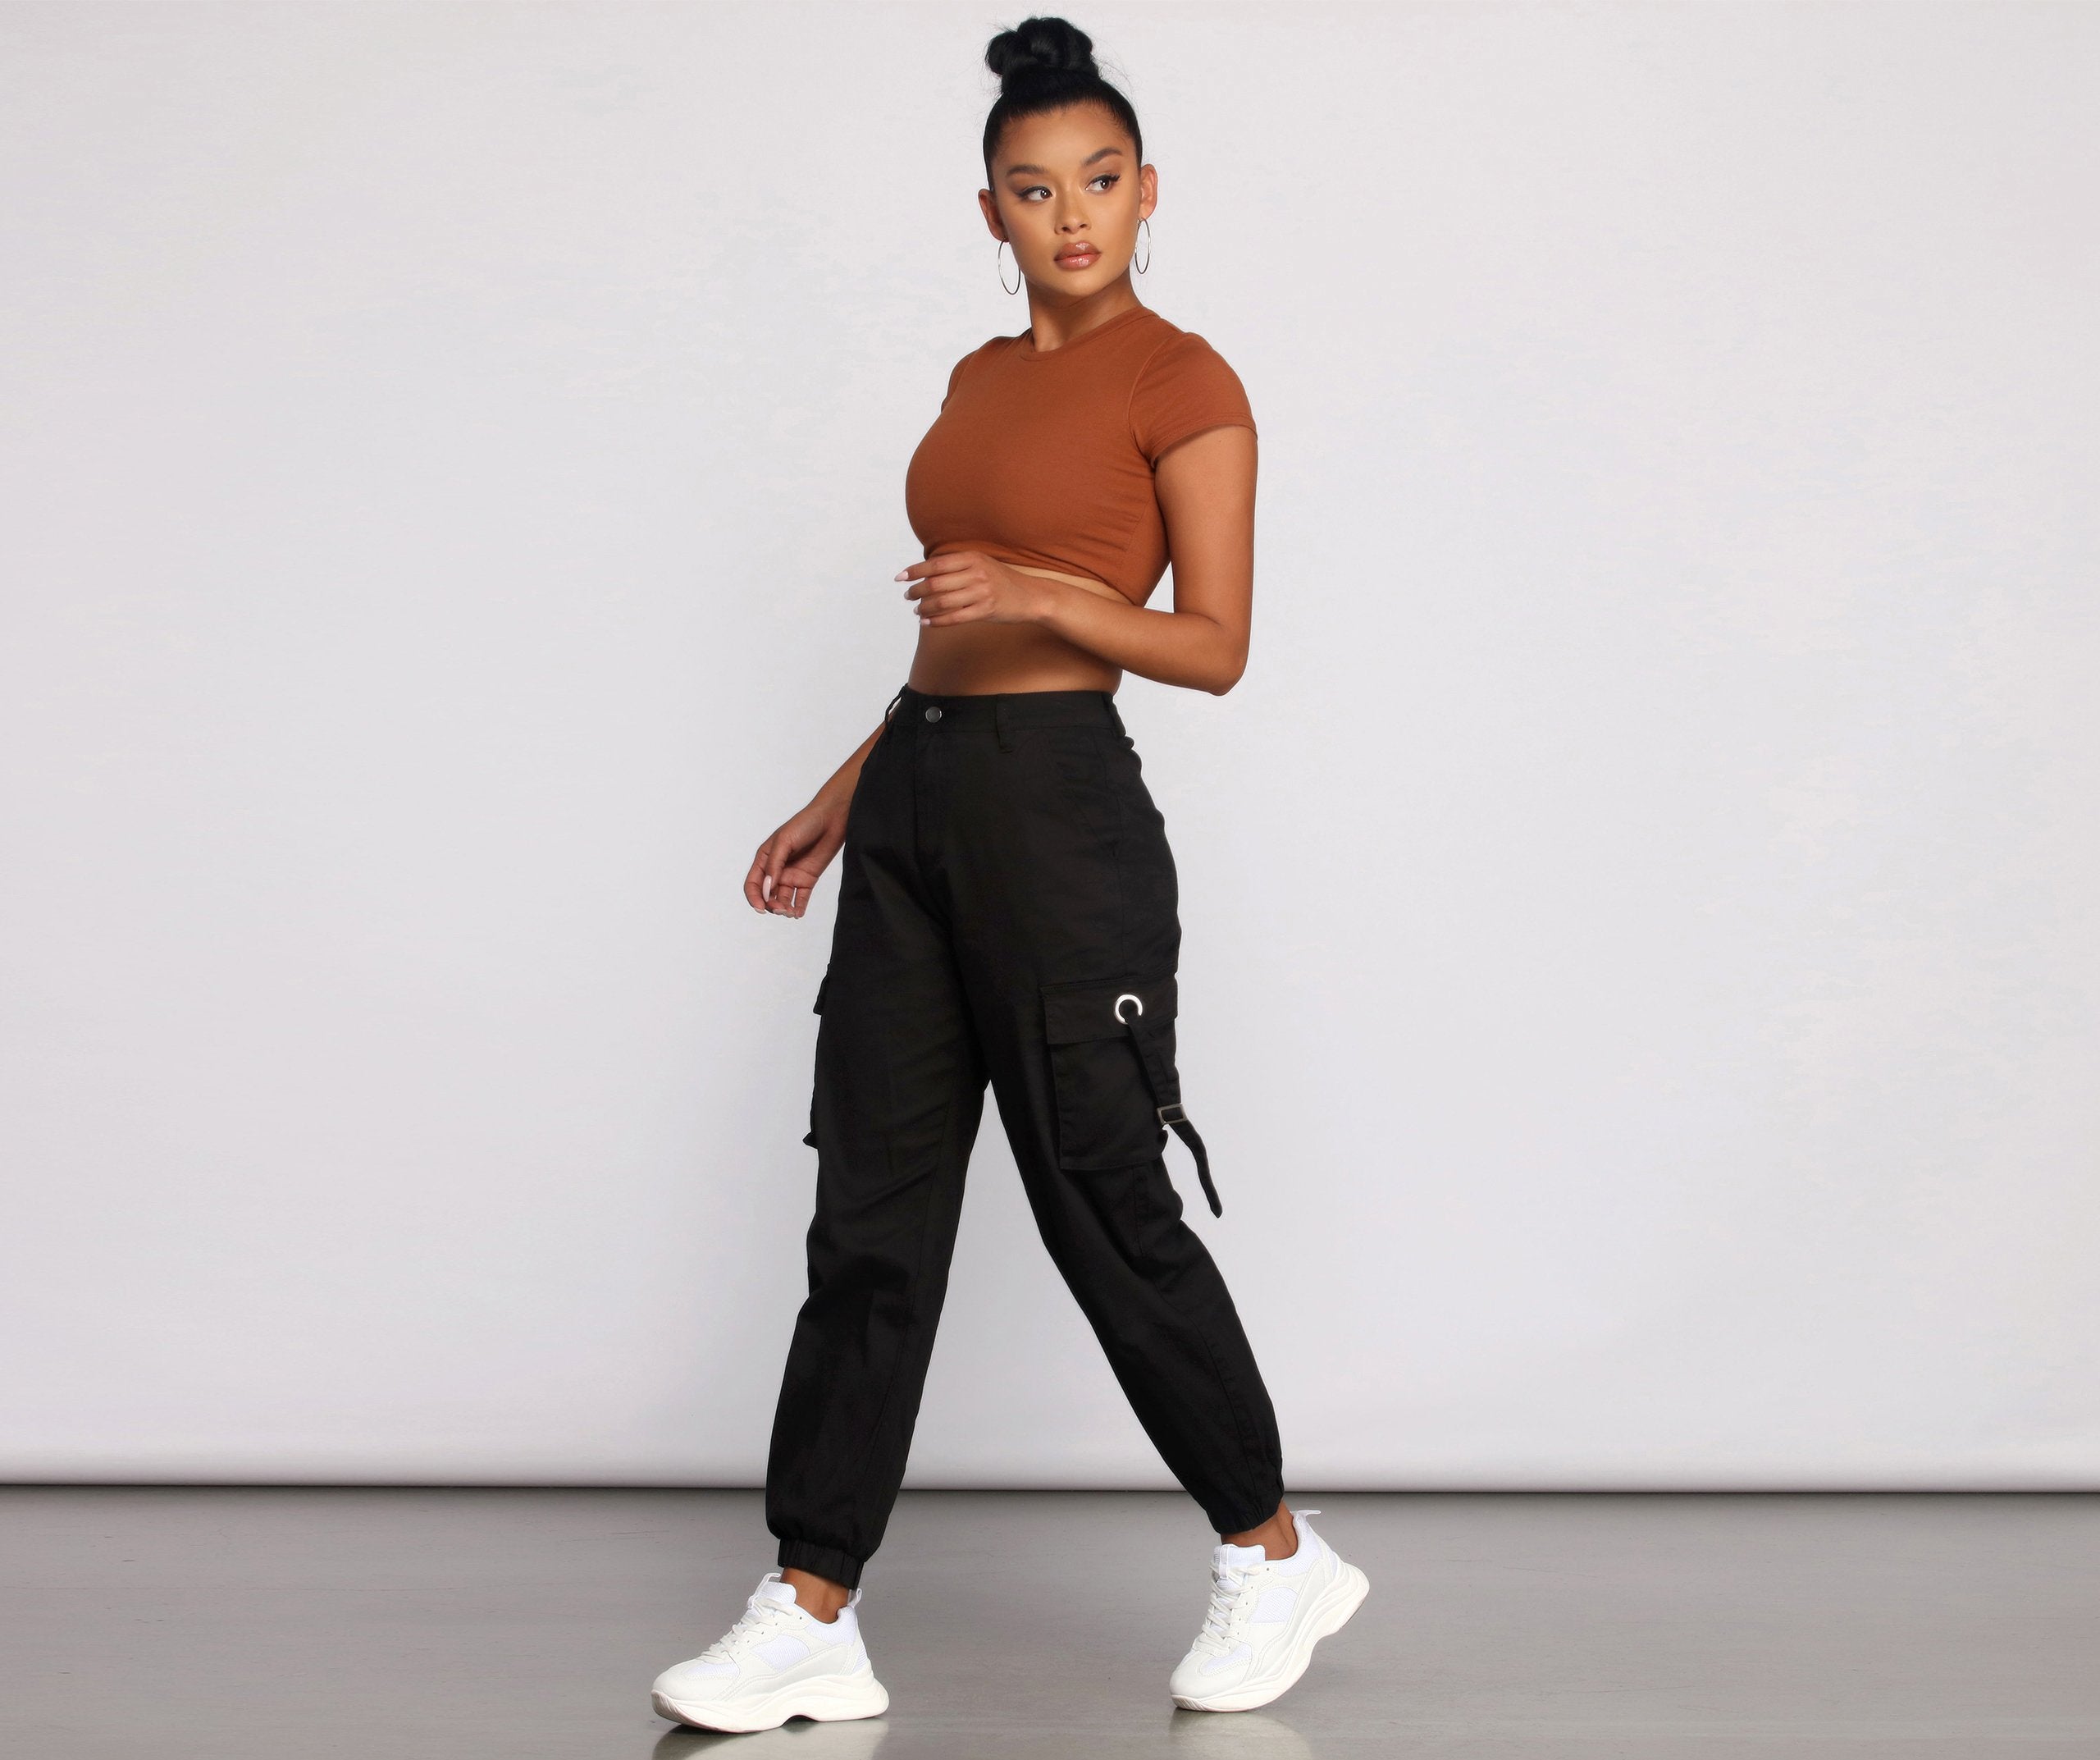 Casual Chic Cargo Jogger Pants